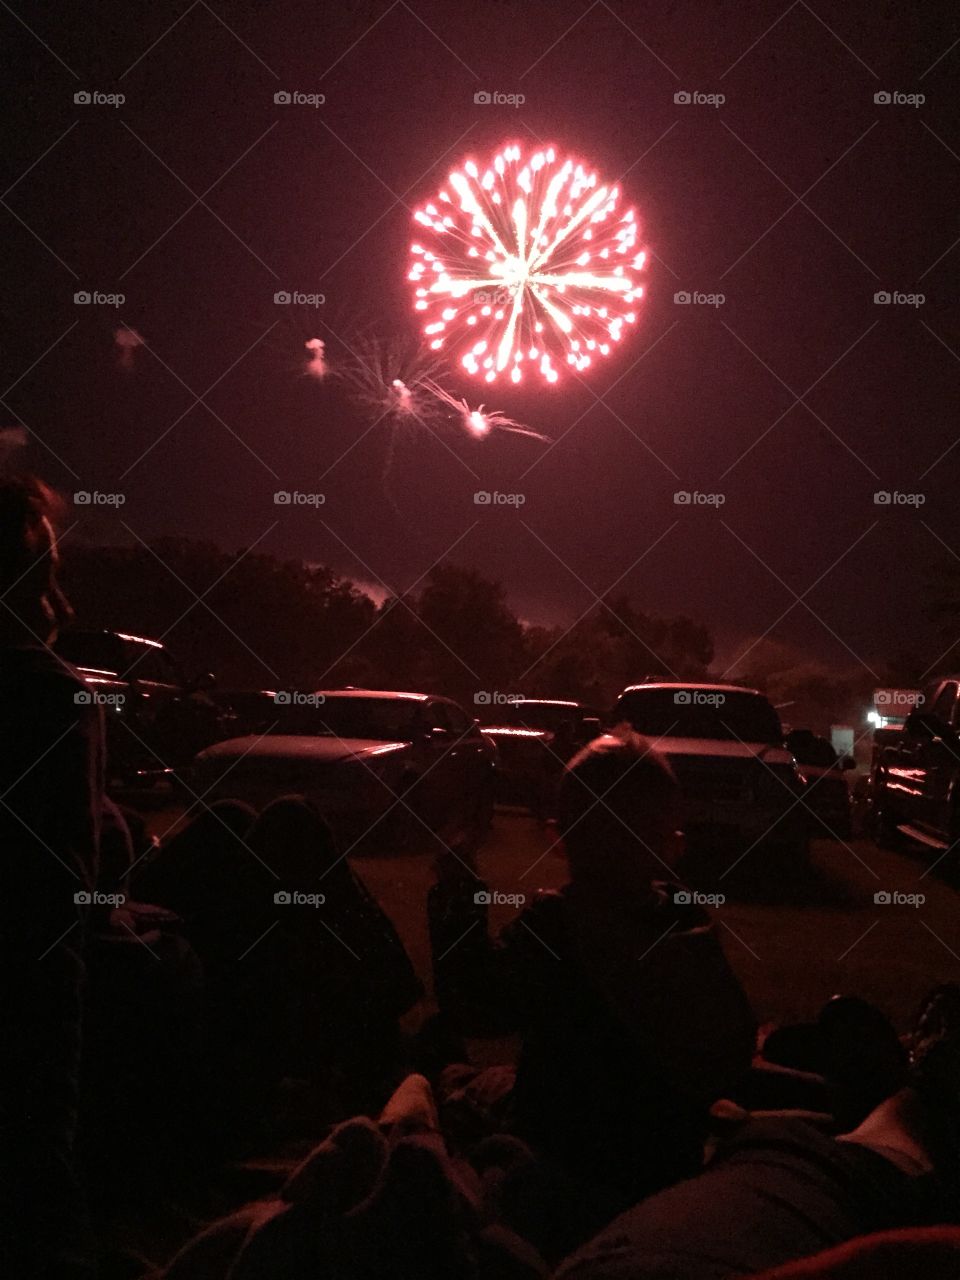 Silhouette of a boy watching fireworks